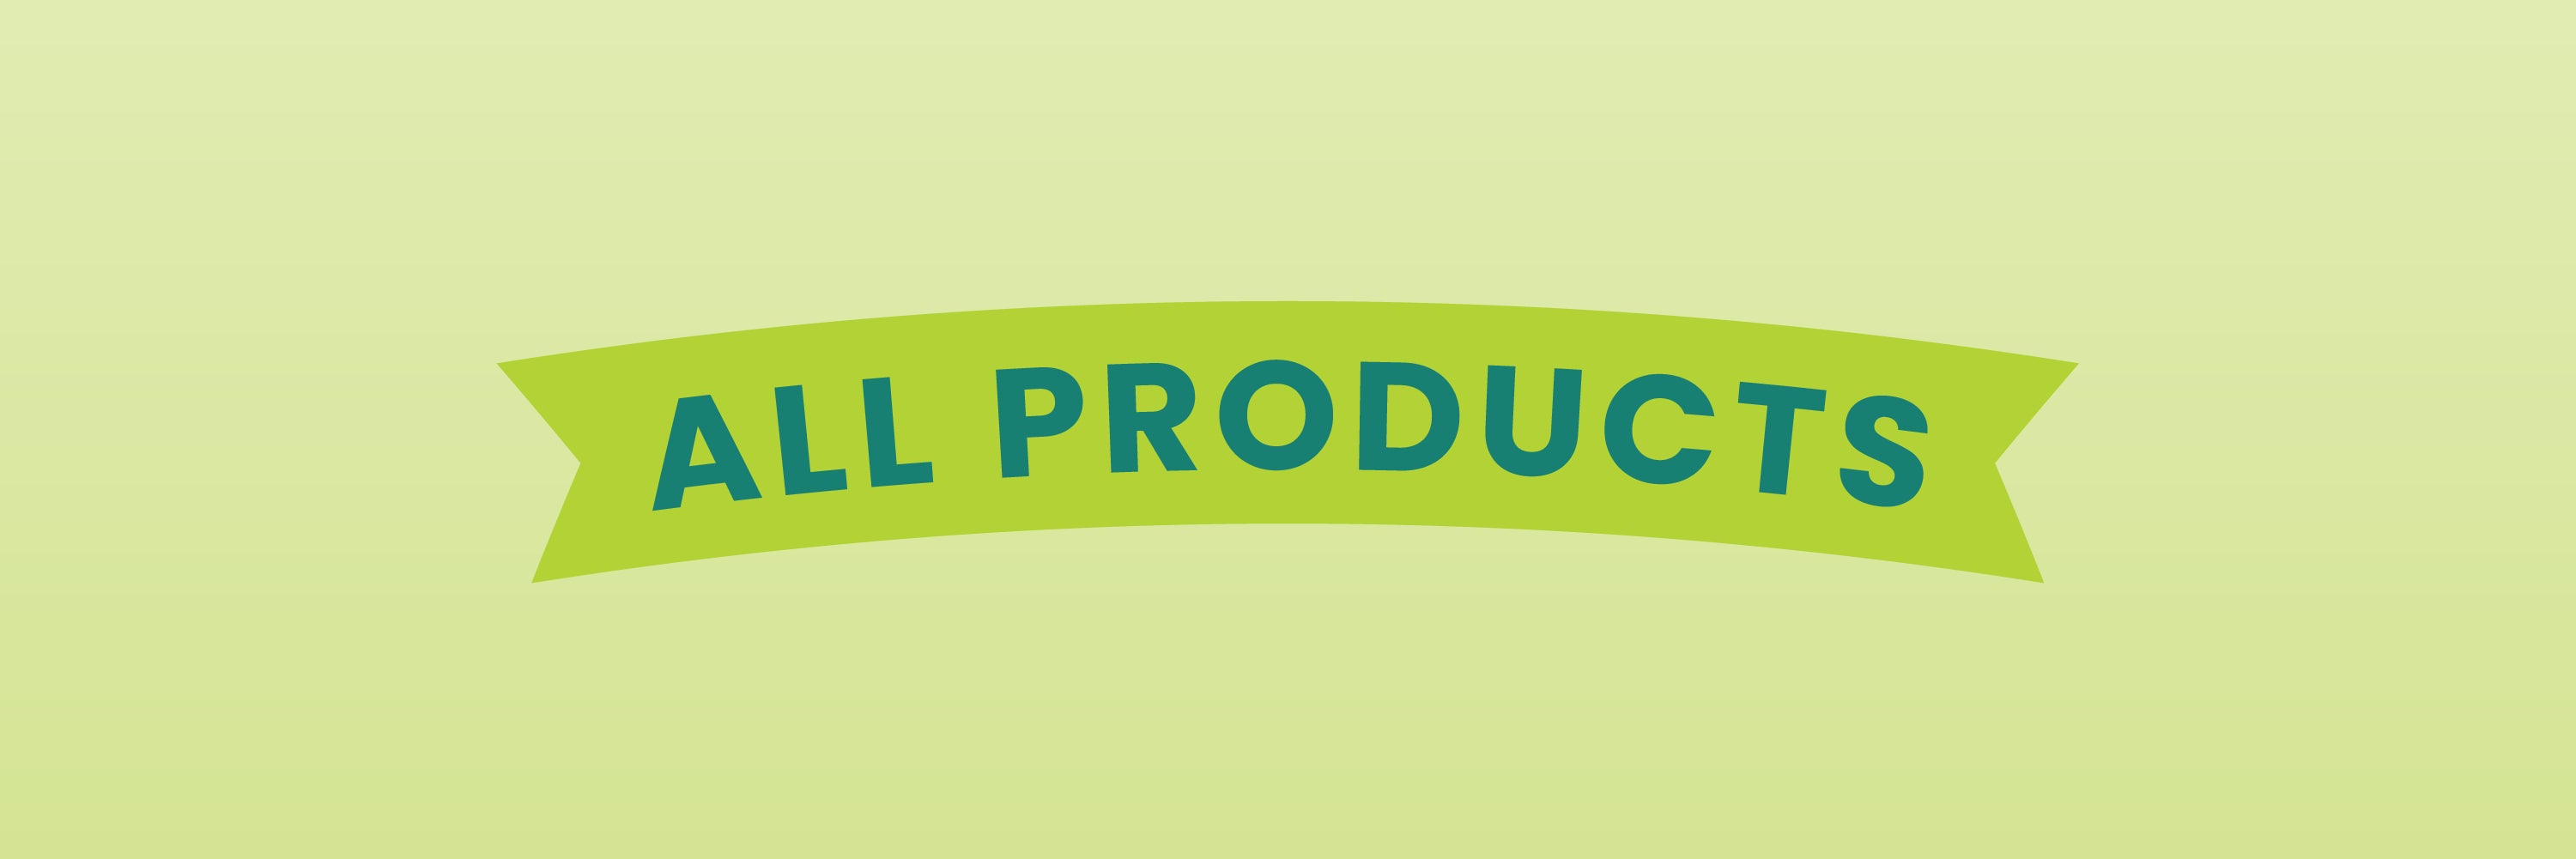 All products green banner